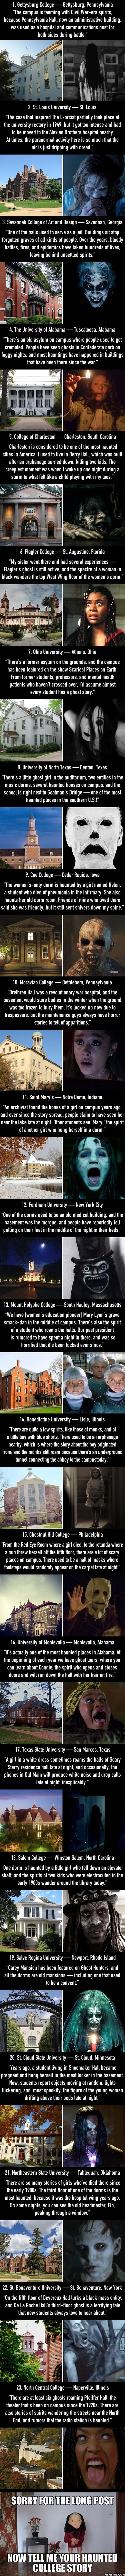 Haunted college campuses thatll scare the s**t out of you